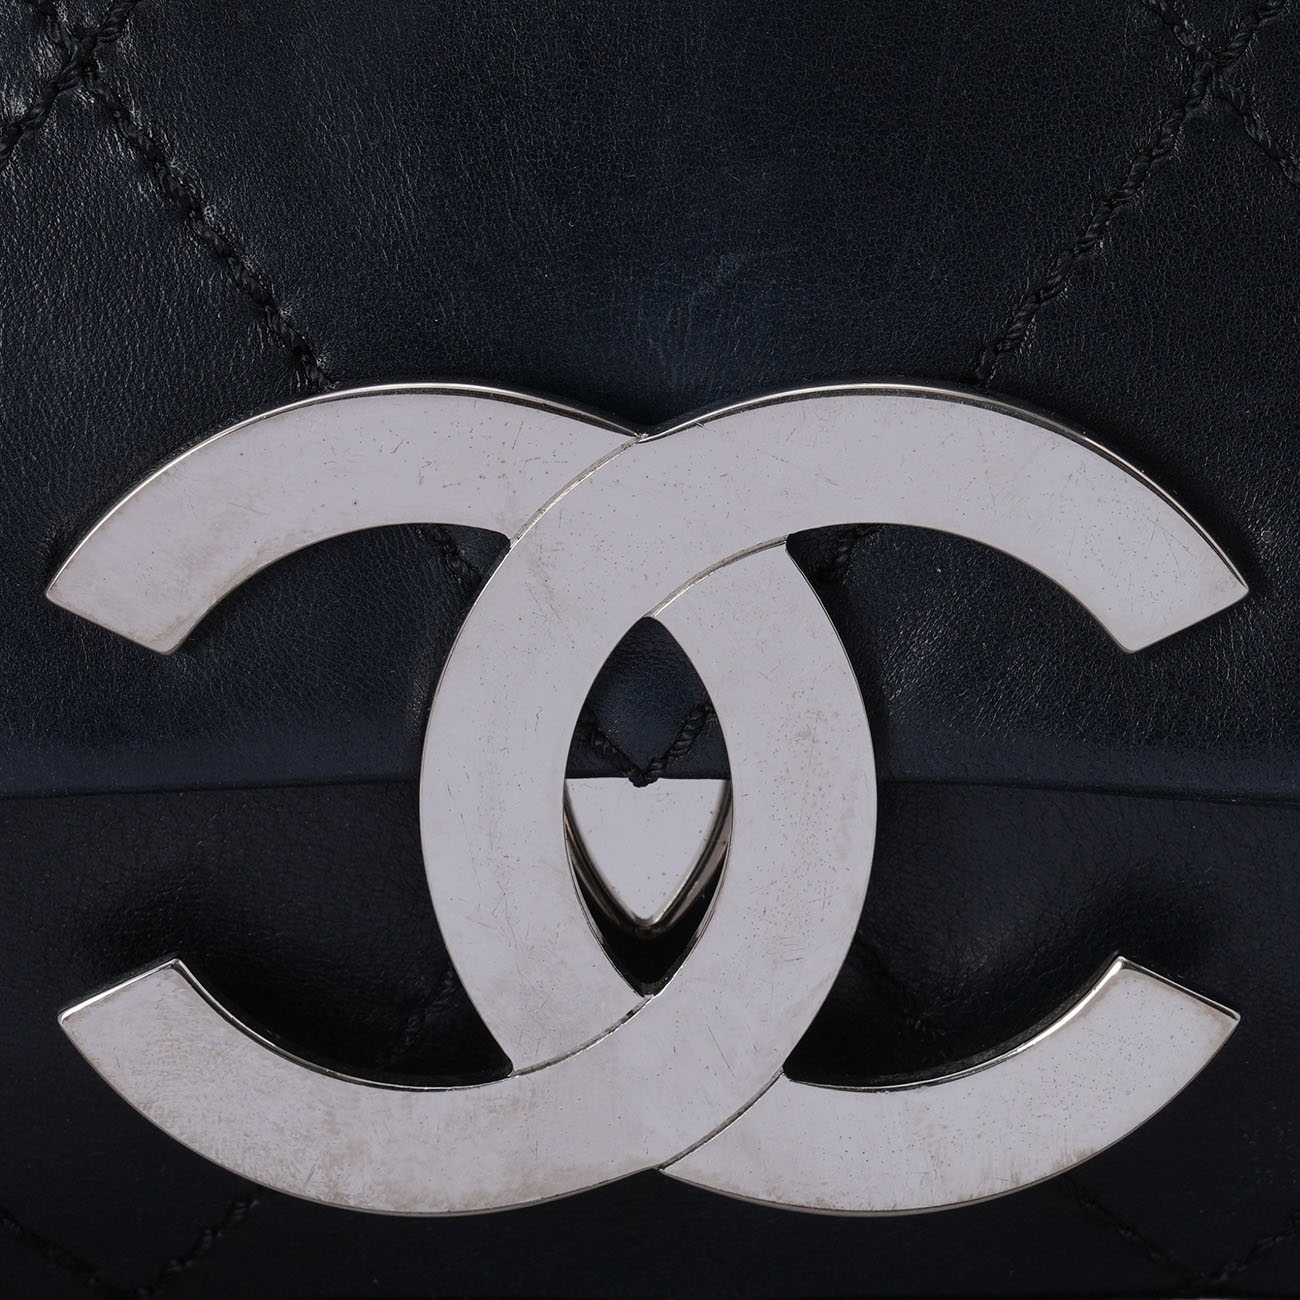 CHANEL(USED)샤넬 시즌 숄더백